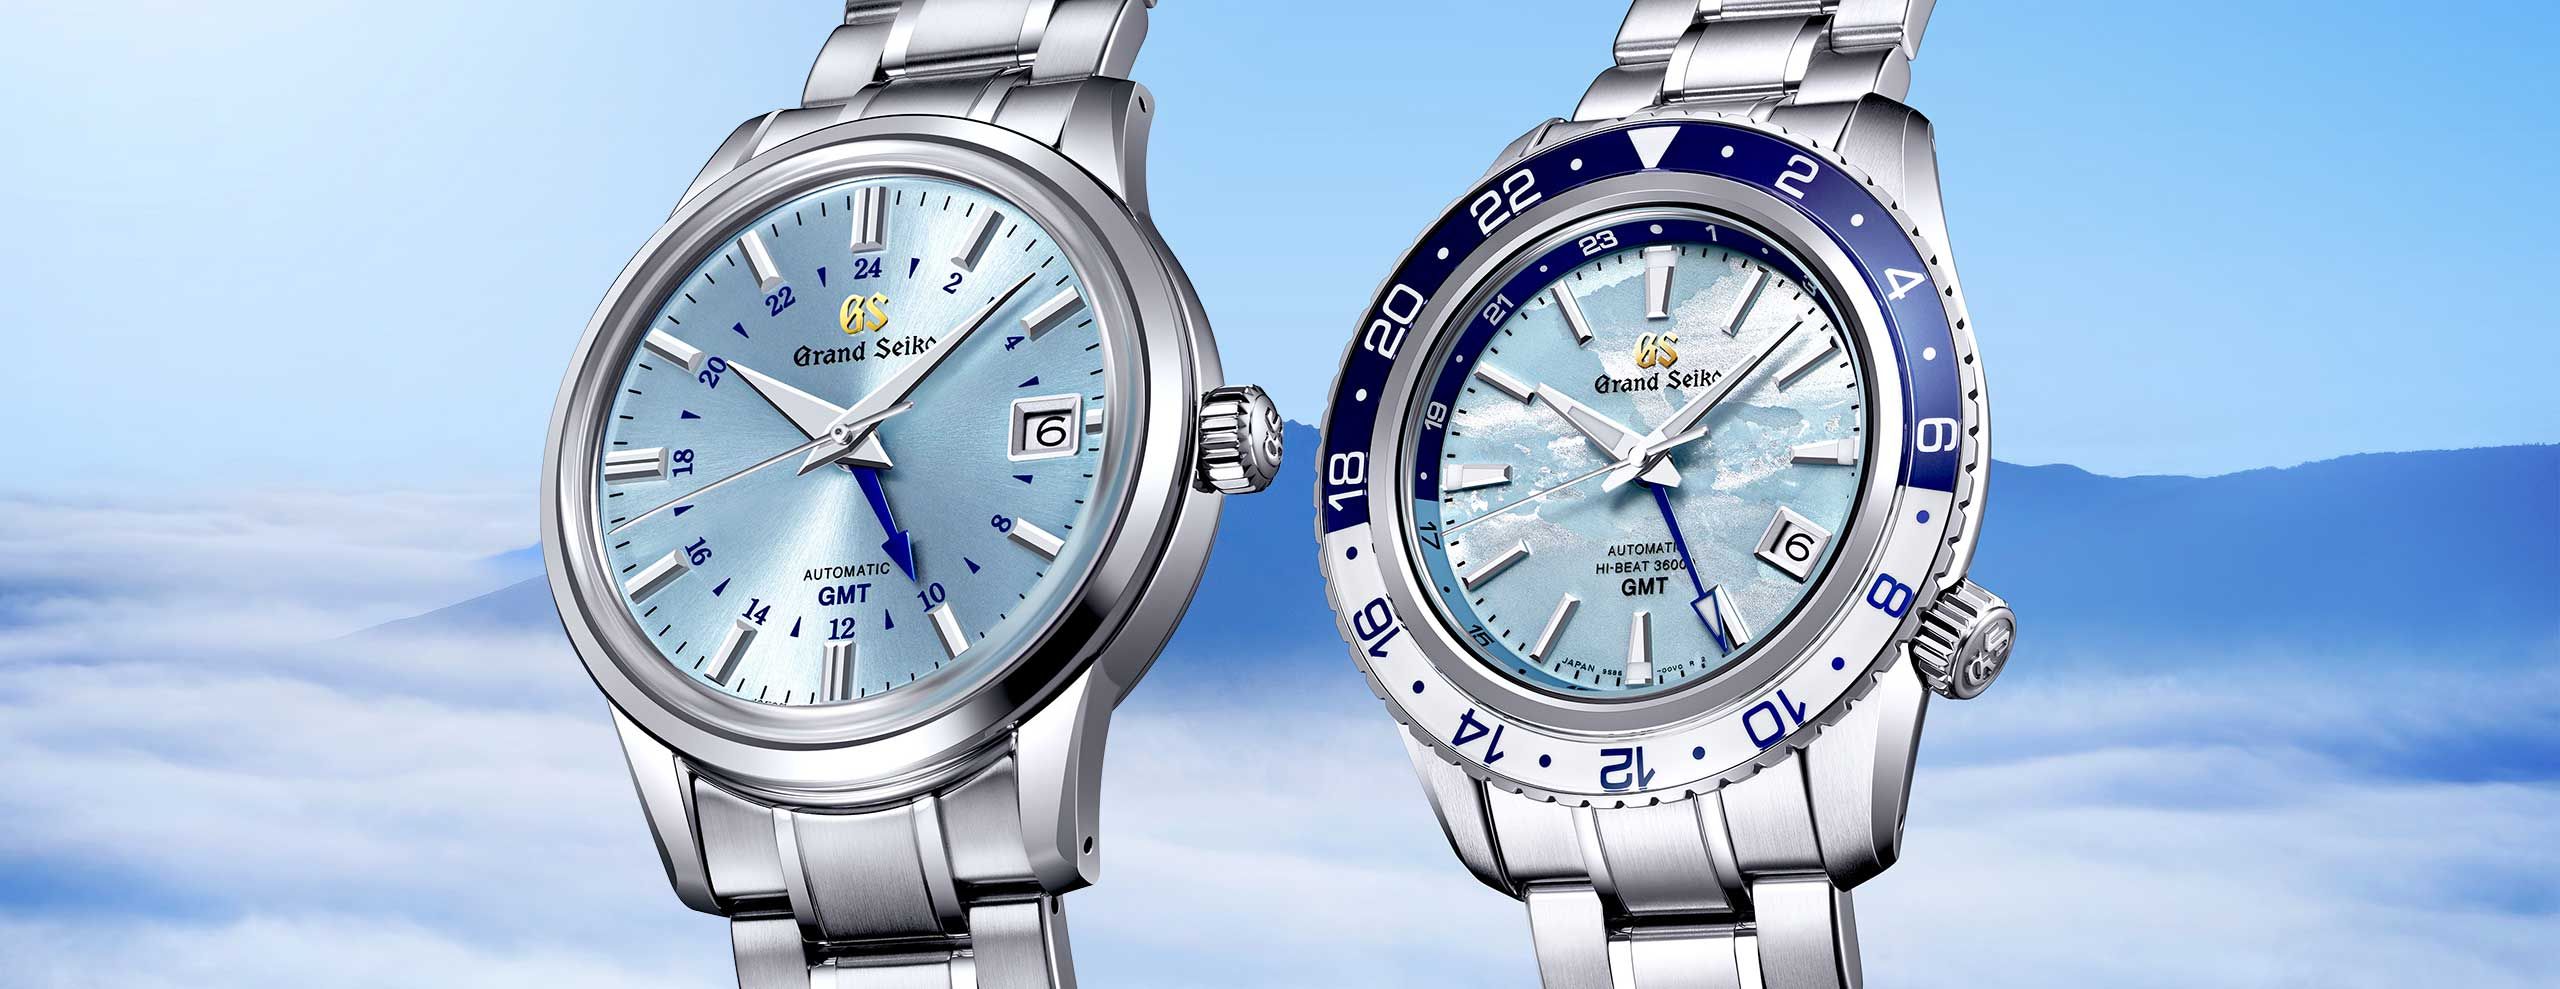 Grand Seiko Unveils Two New GMT Watches to Commemorate 25 Years of Caliber 9S